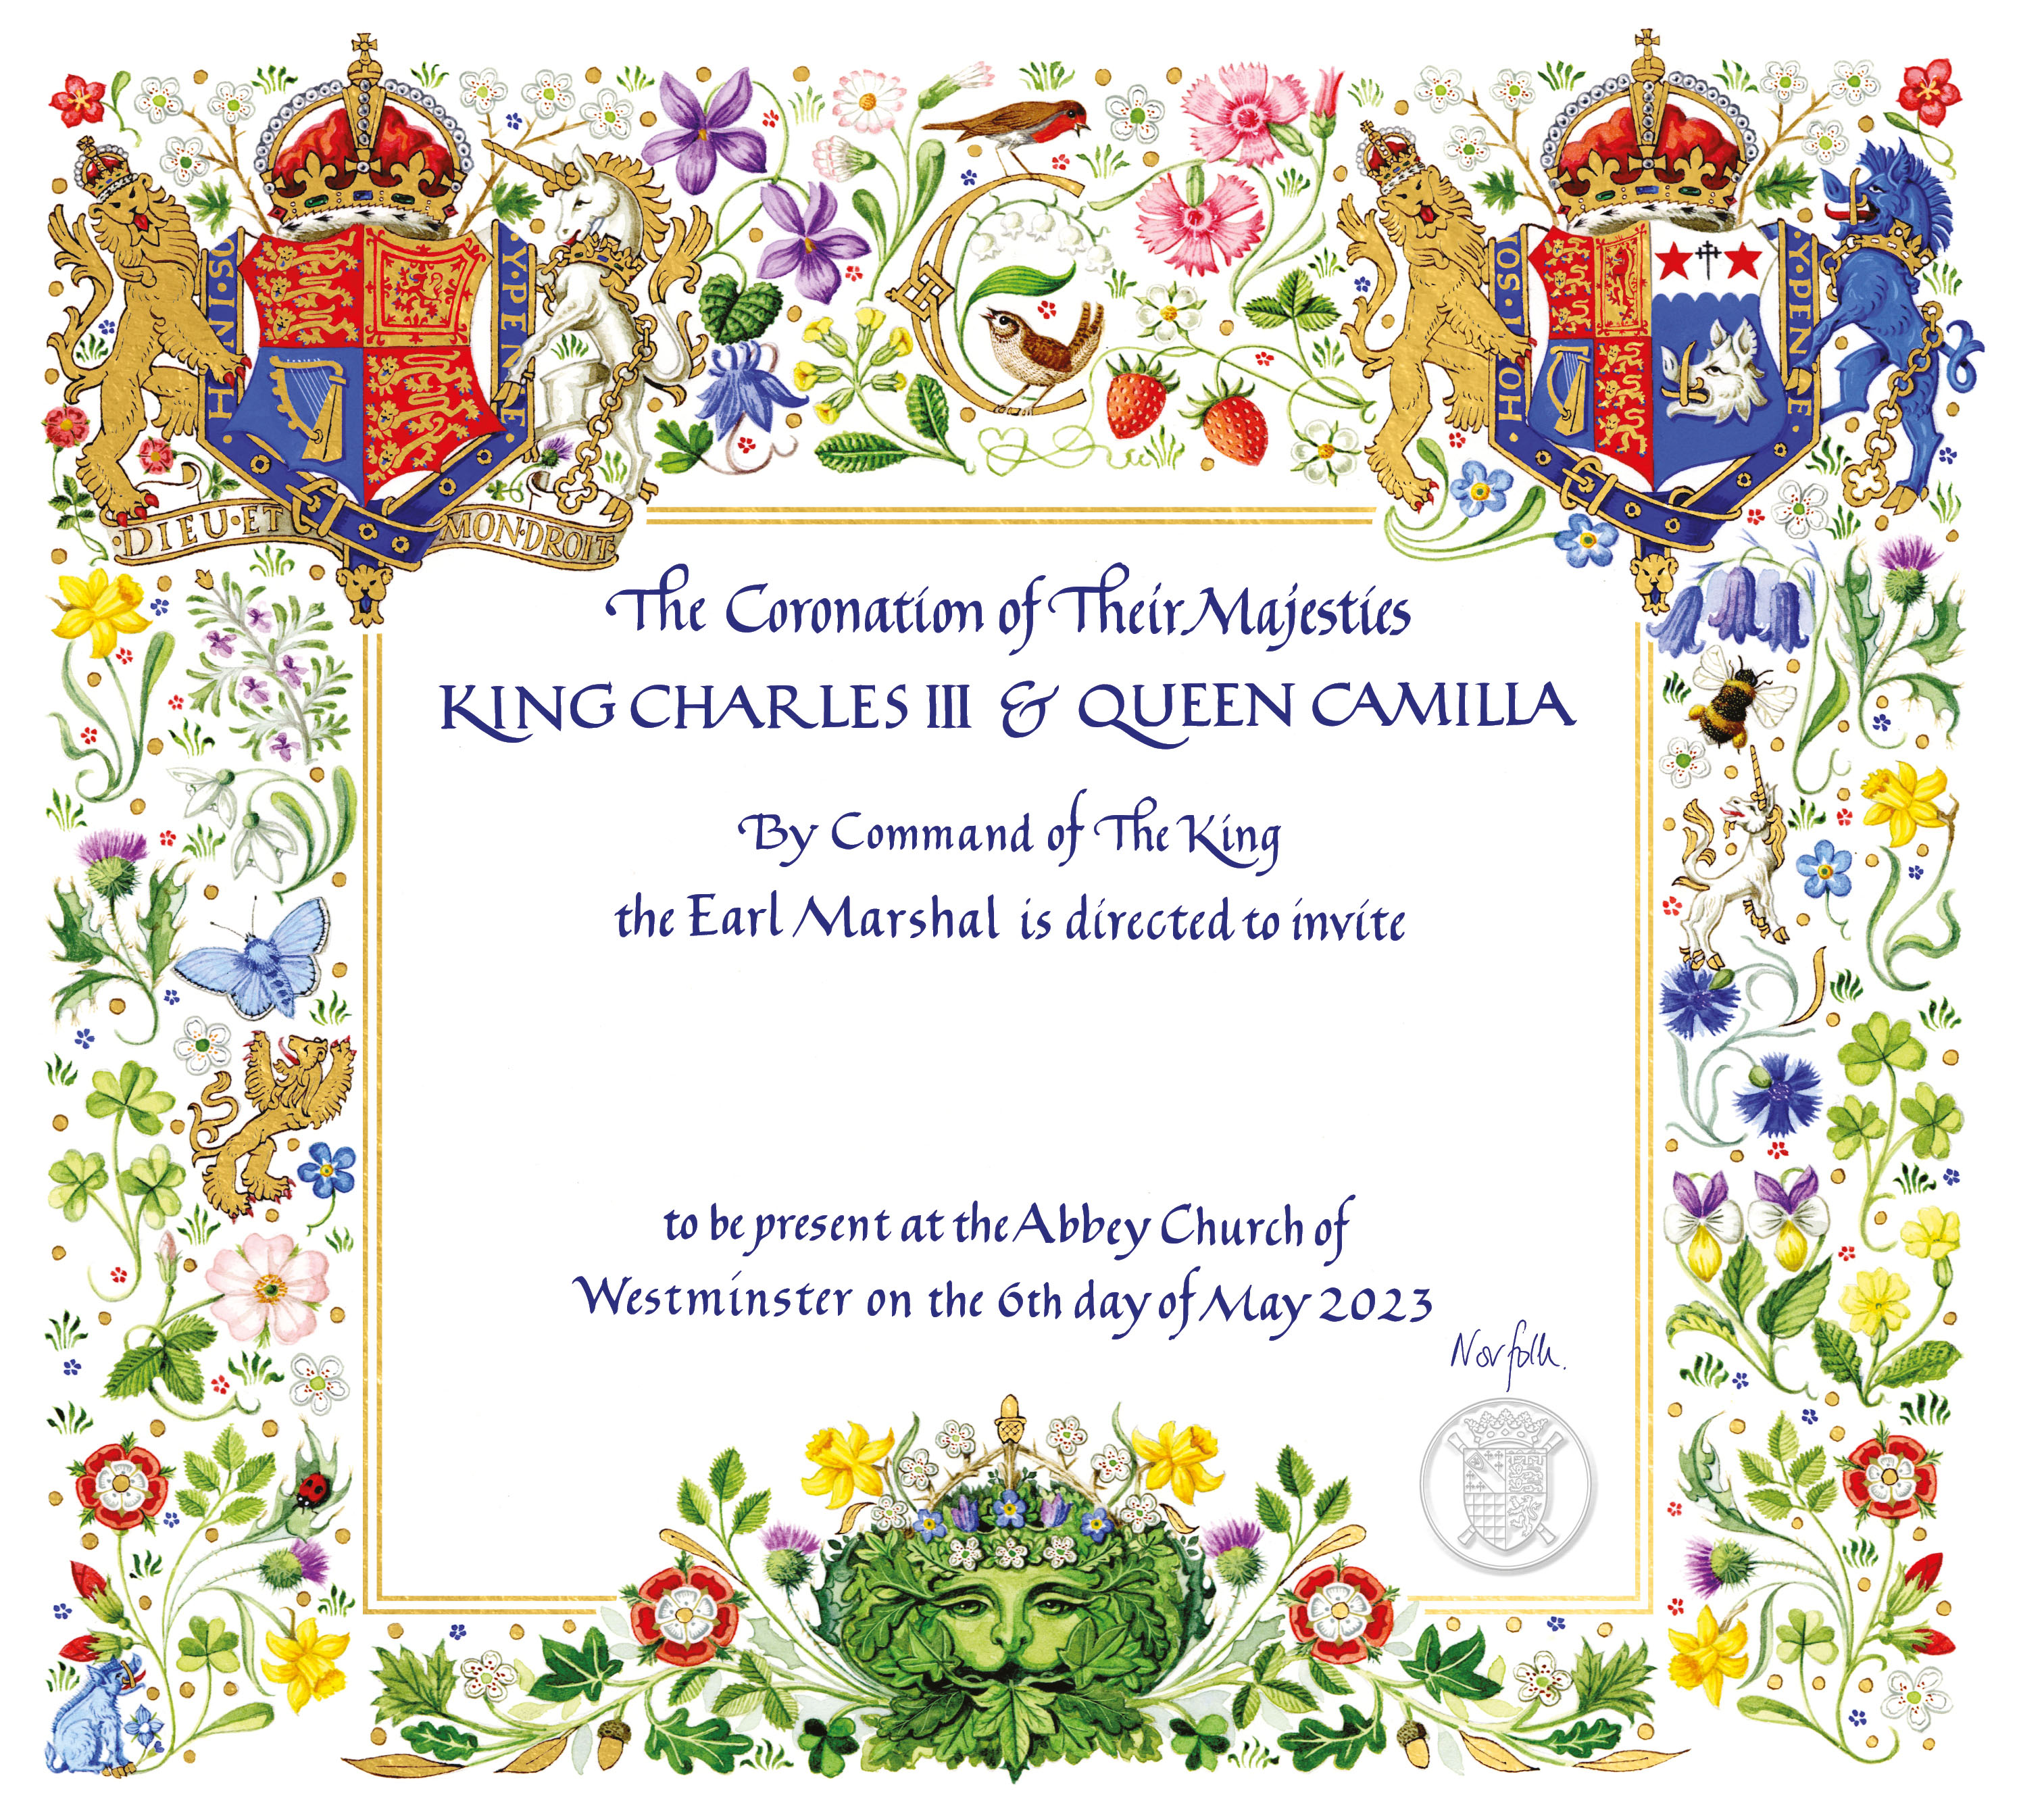 <p>On April 4, 2023, Buckingham Palace released this image of the invitation to the May 6, 2023, coronation of Britain's King Charles III in London. This invitation has been issued to more than 2,000 guests who are expected to attend the ceremony in Westminster Abbey. It was designed by heraldic artist and manuscript illuminator Andrew Jamieson. The original artwork was hand-painted in watercolor and gouache. The design, which recalls the coronation emblem, was reproduced and printed on recycled cards with gold foil detailing.</p>